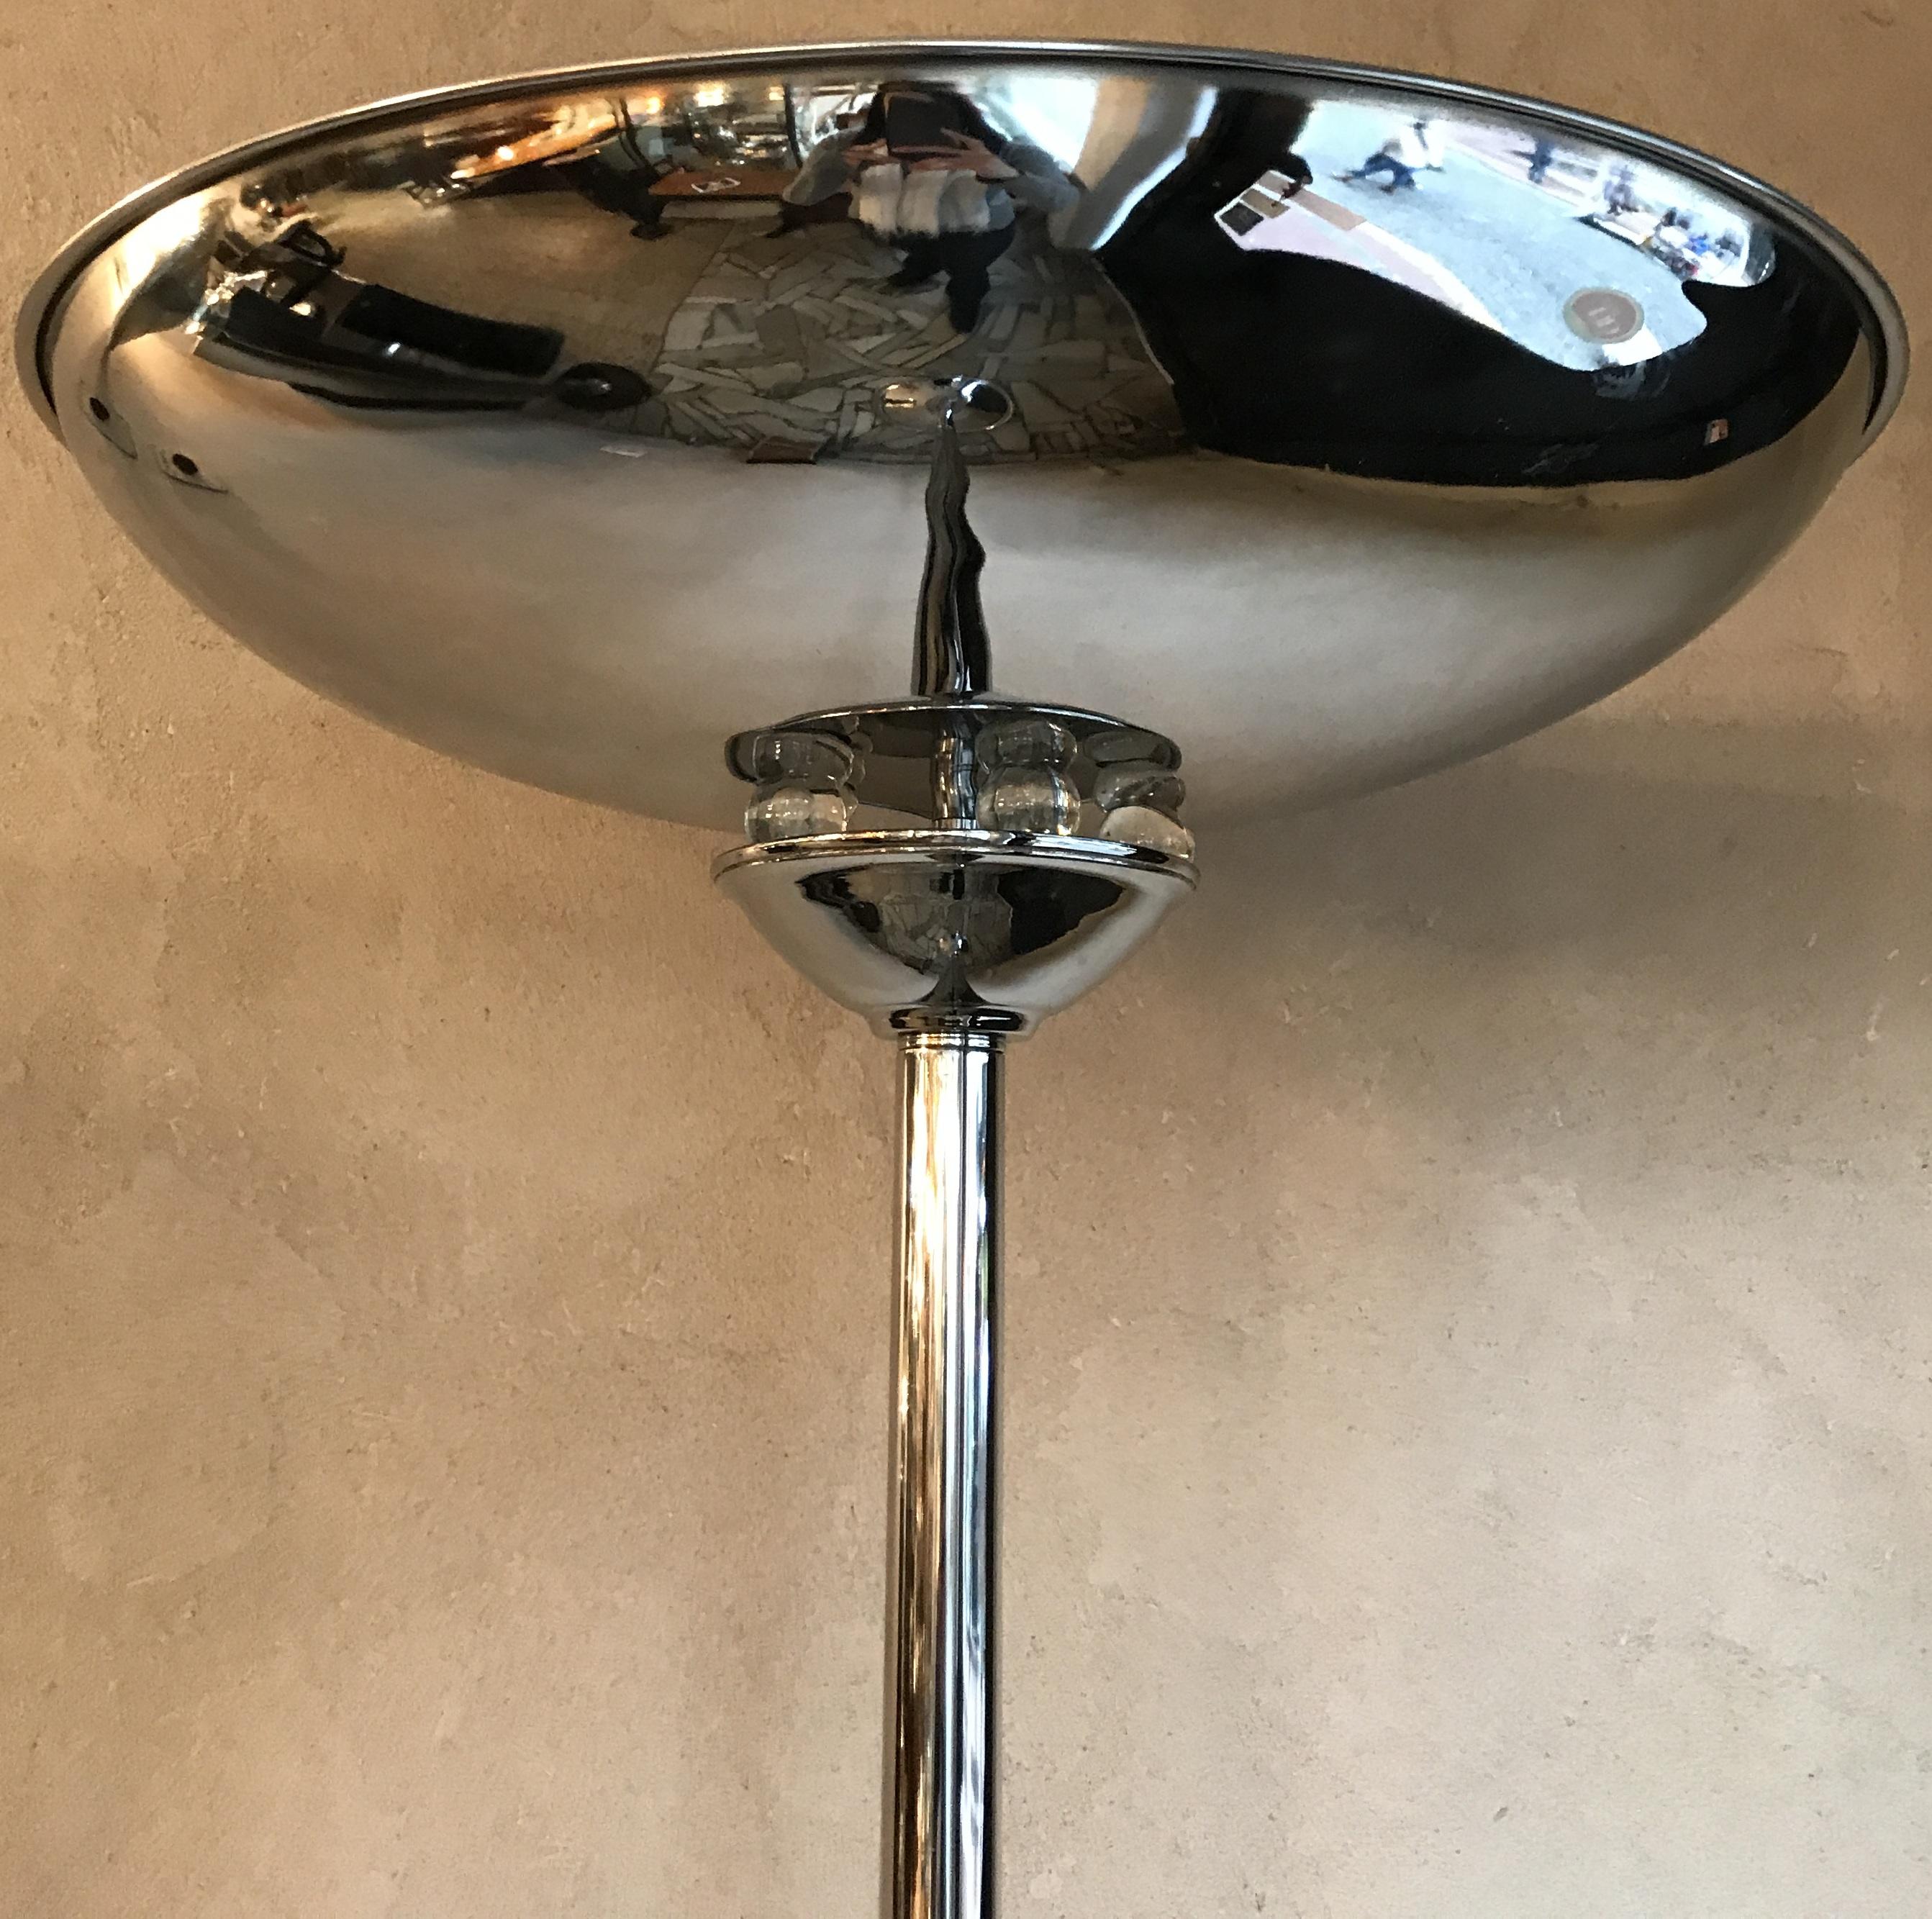 2 floor lamps Art Deco.

Materials: wood, glass, chrome
France
1930
You want to live in the golden years, those are the floor lamps that your project needs.
We have specialized in the sale of Art Deco and Art Nouveau styles since 1982.
Pushing the